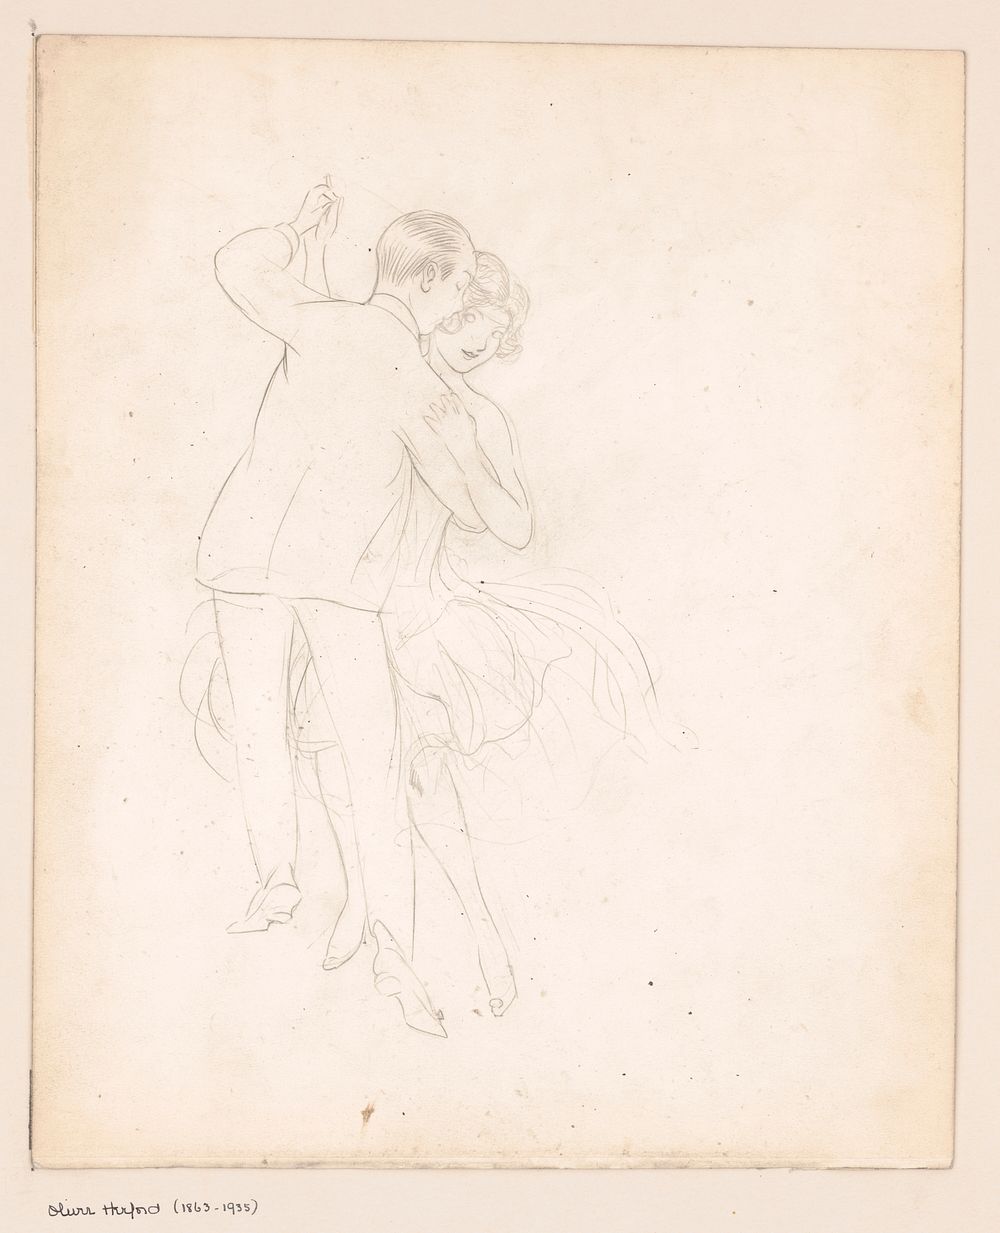 Man and woman dancing close (between 1880 and 1935) by Oliver Herford